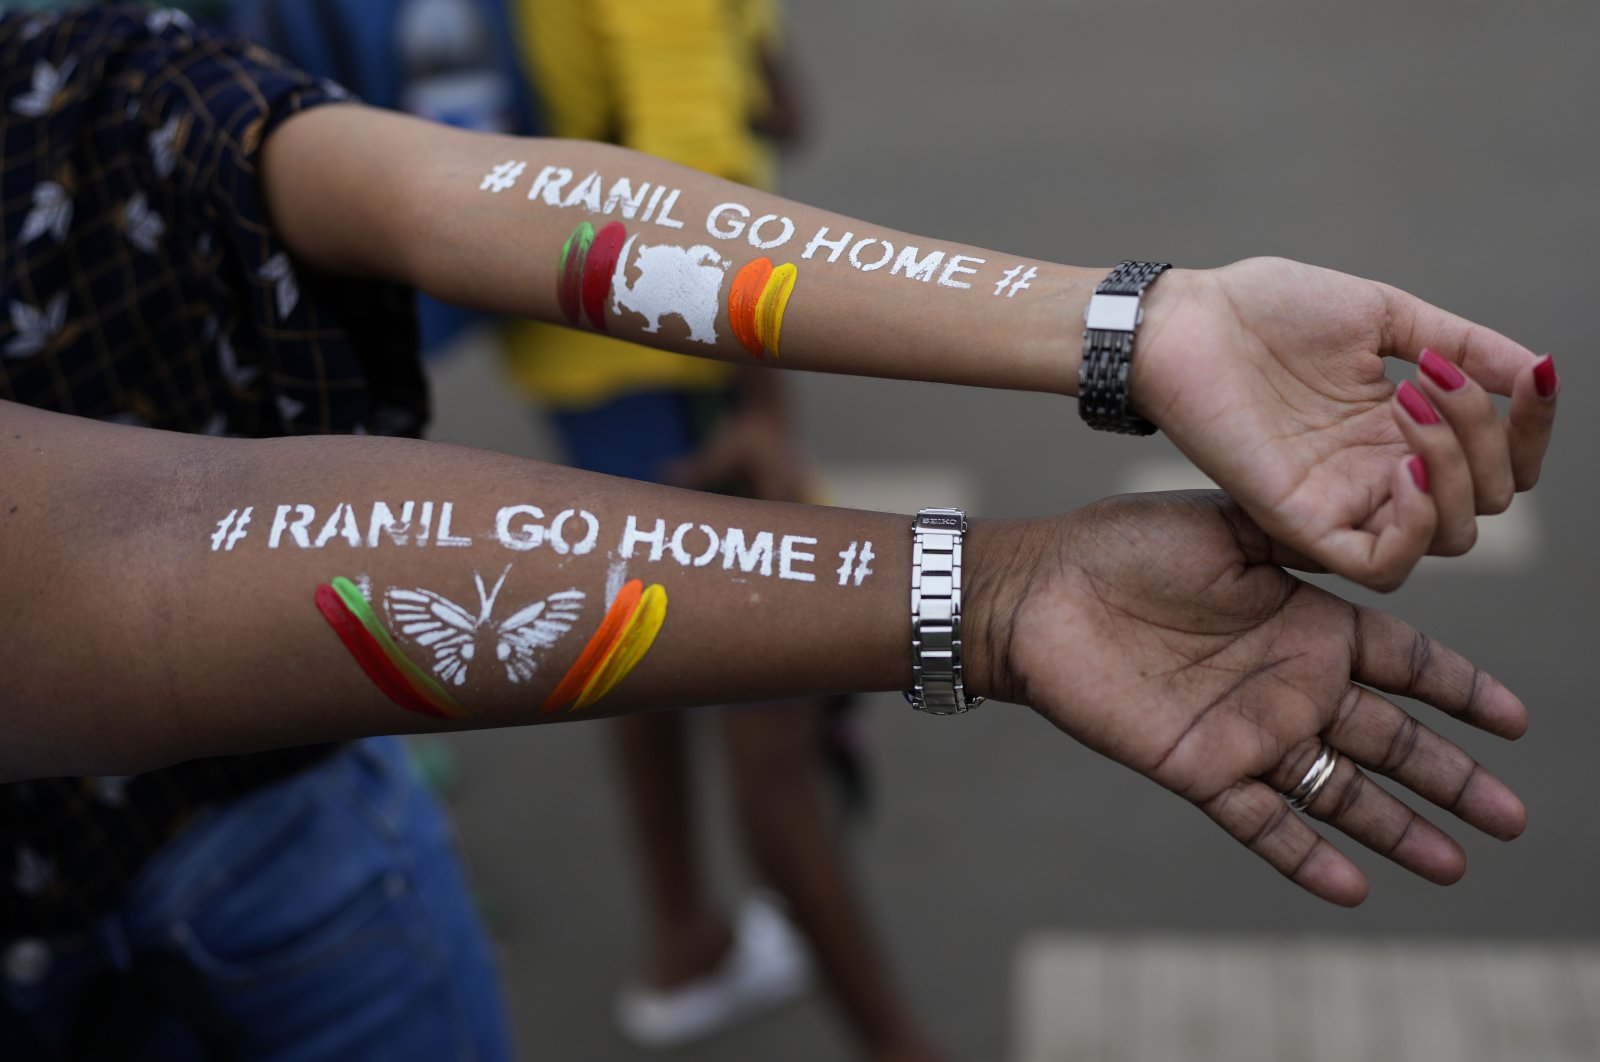 Girls display their arms painted with the message &quot;Ranil go home,&quot; referring to Prime Minister Ranil Wickremesinghe, at the protest site in Colombo, Sri Lanka, July 17, 2022. (AP Photo)